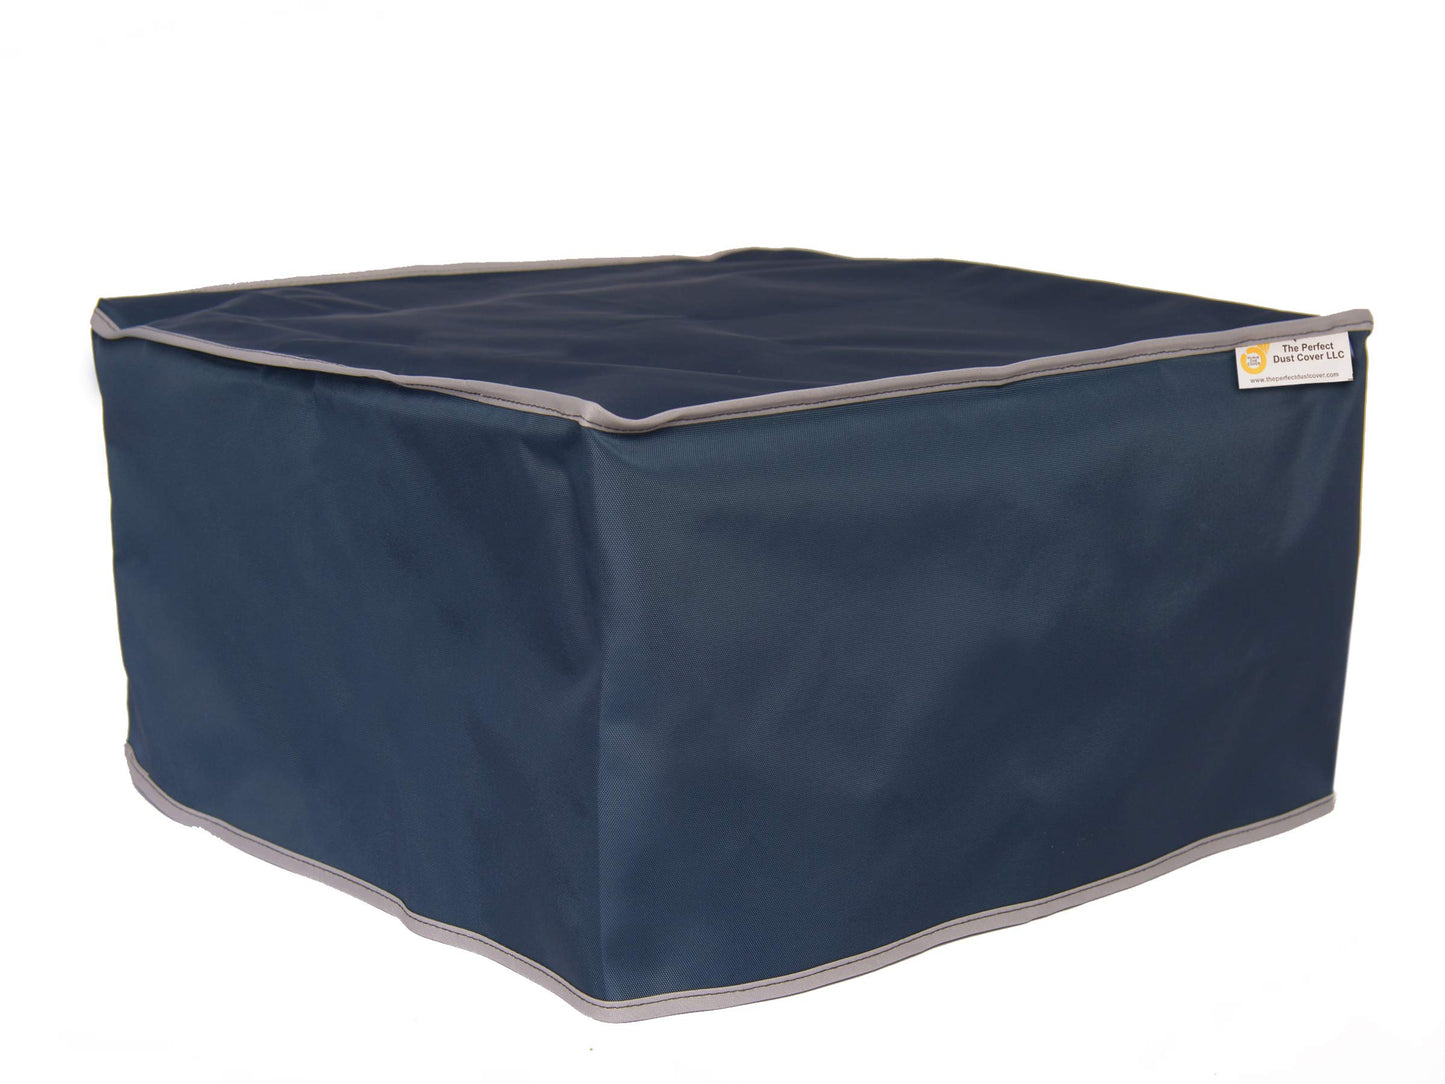 The Perfect Dust Cover, Navy Blue Nylon Cover for Brother MFC-J5930DW INKvestment Inkjet Printer, Anti Static and Waterproof Cover Dimensions 20.9''W x 15.7''D x 14.7''H by The Perfect Dust Cover LLC